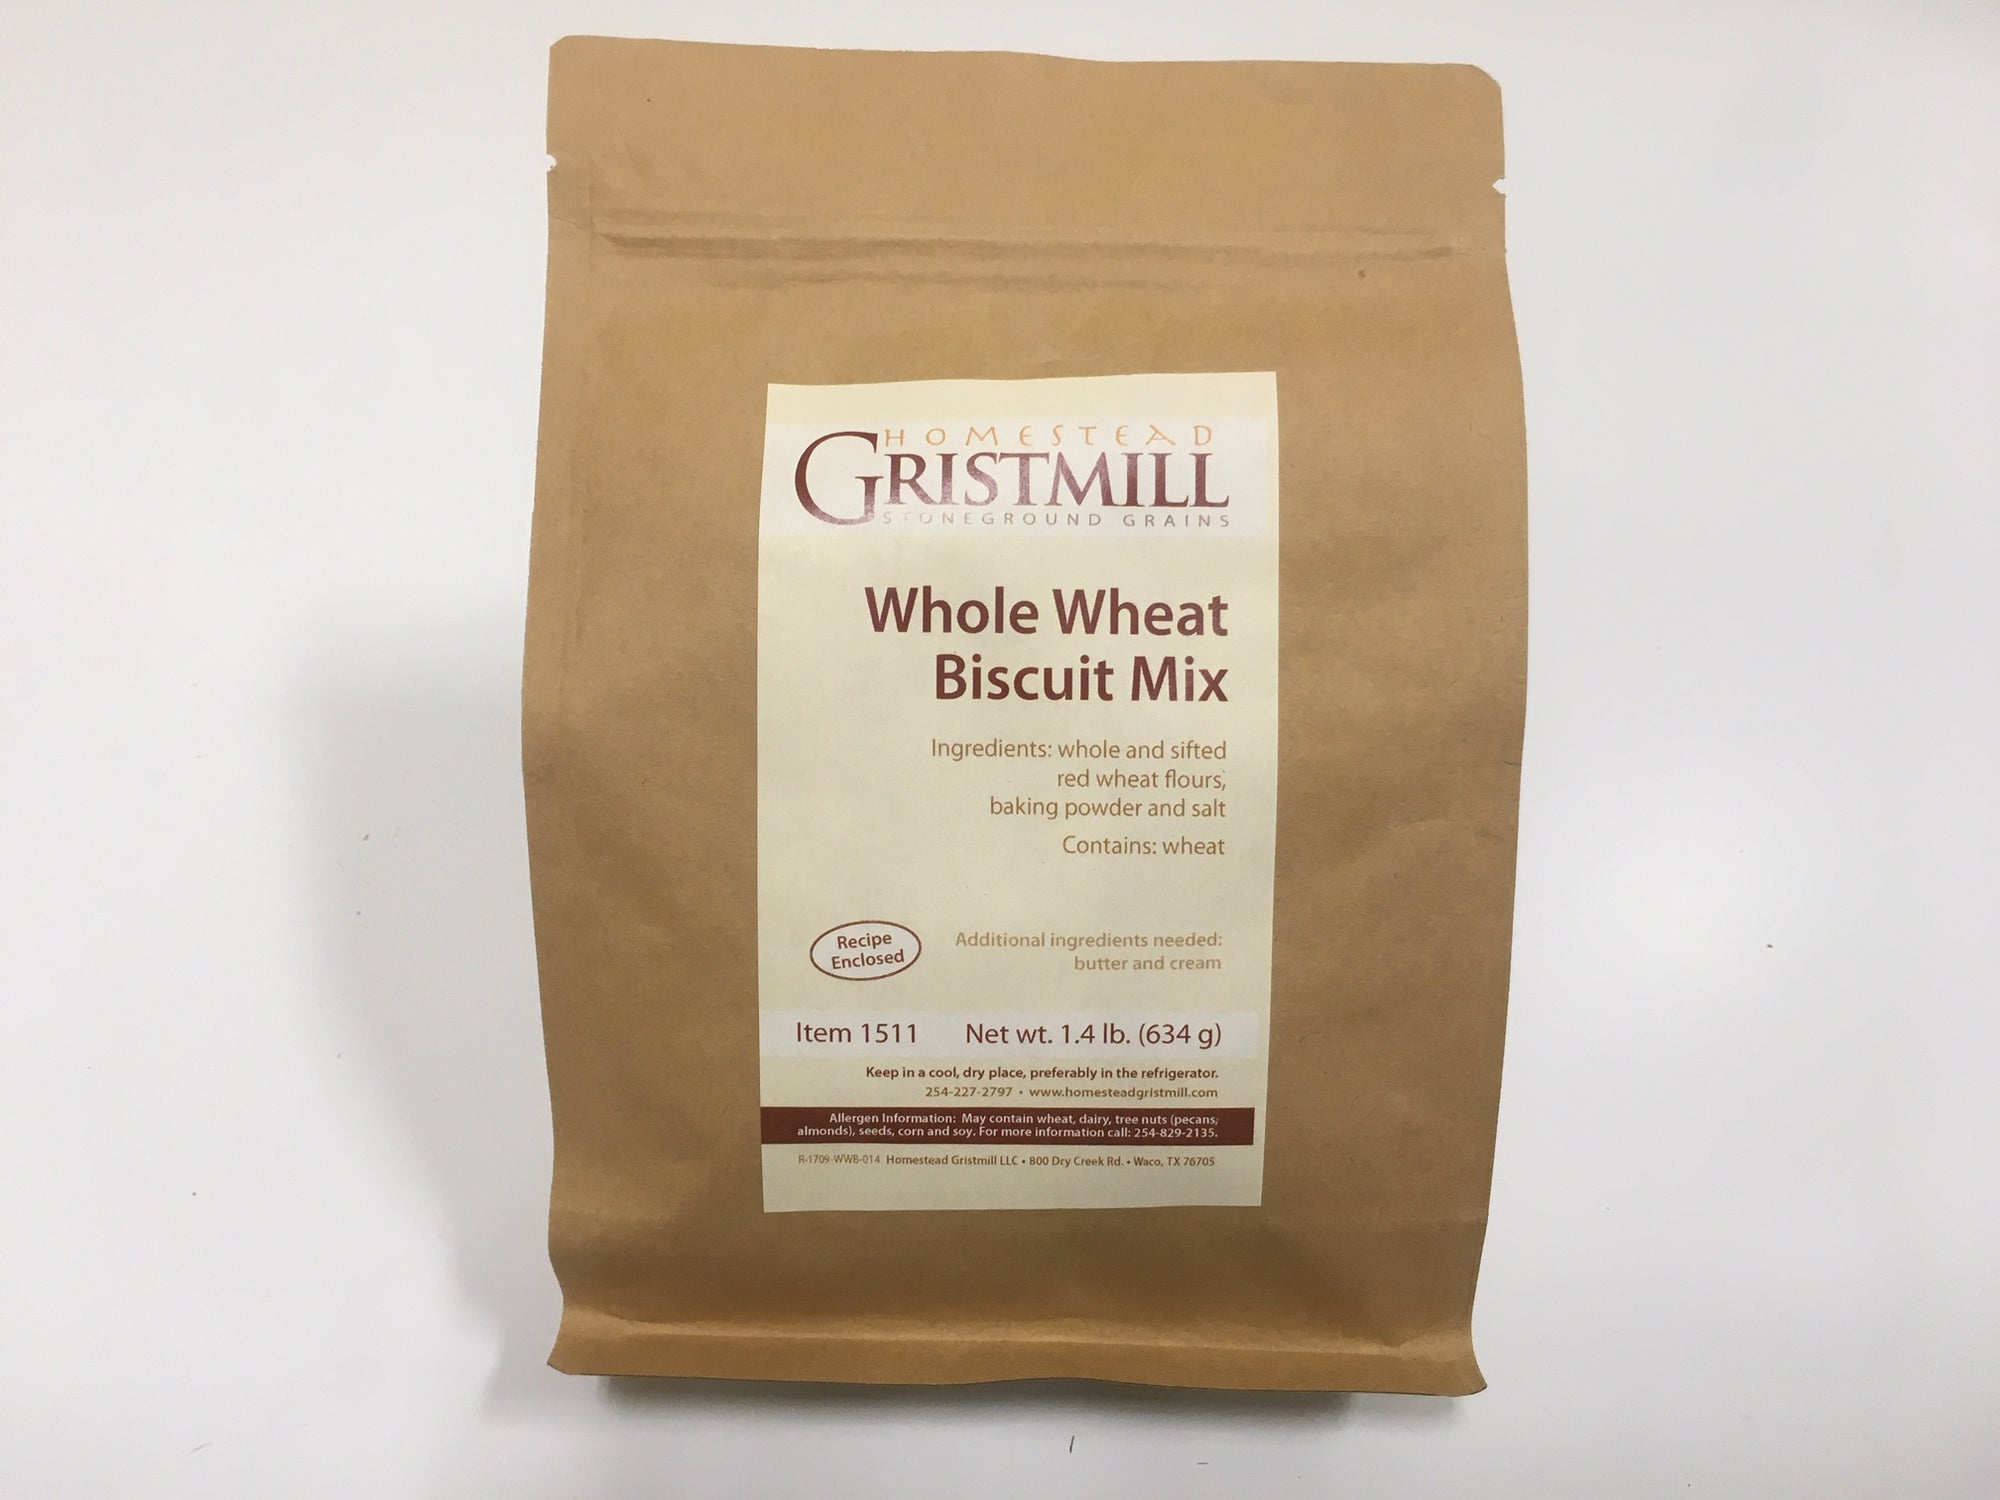 Whole Wheat Biscuit Mix